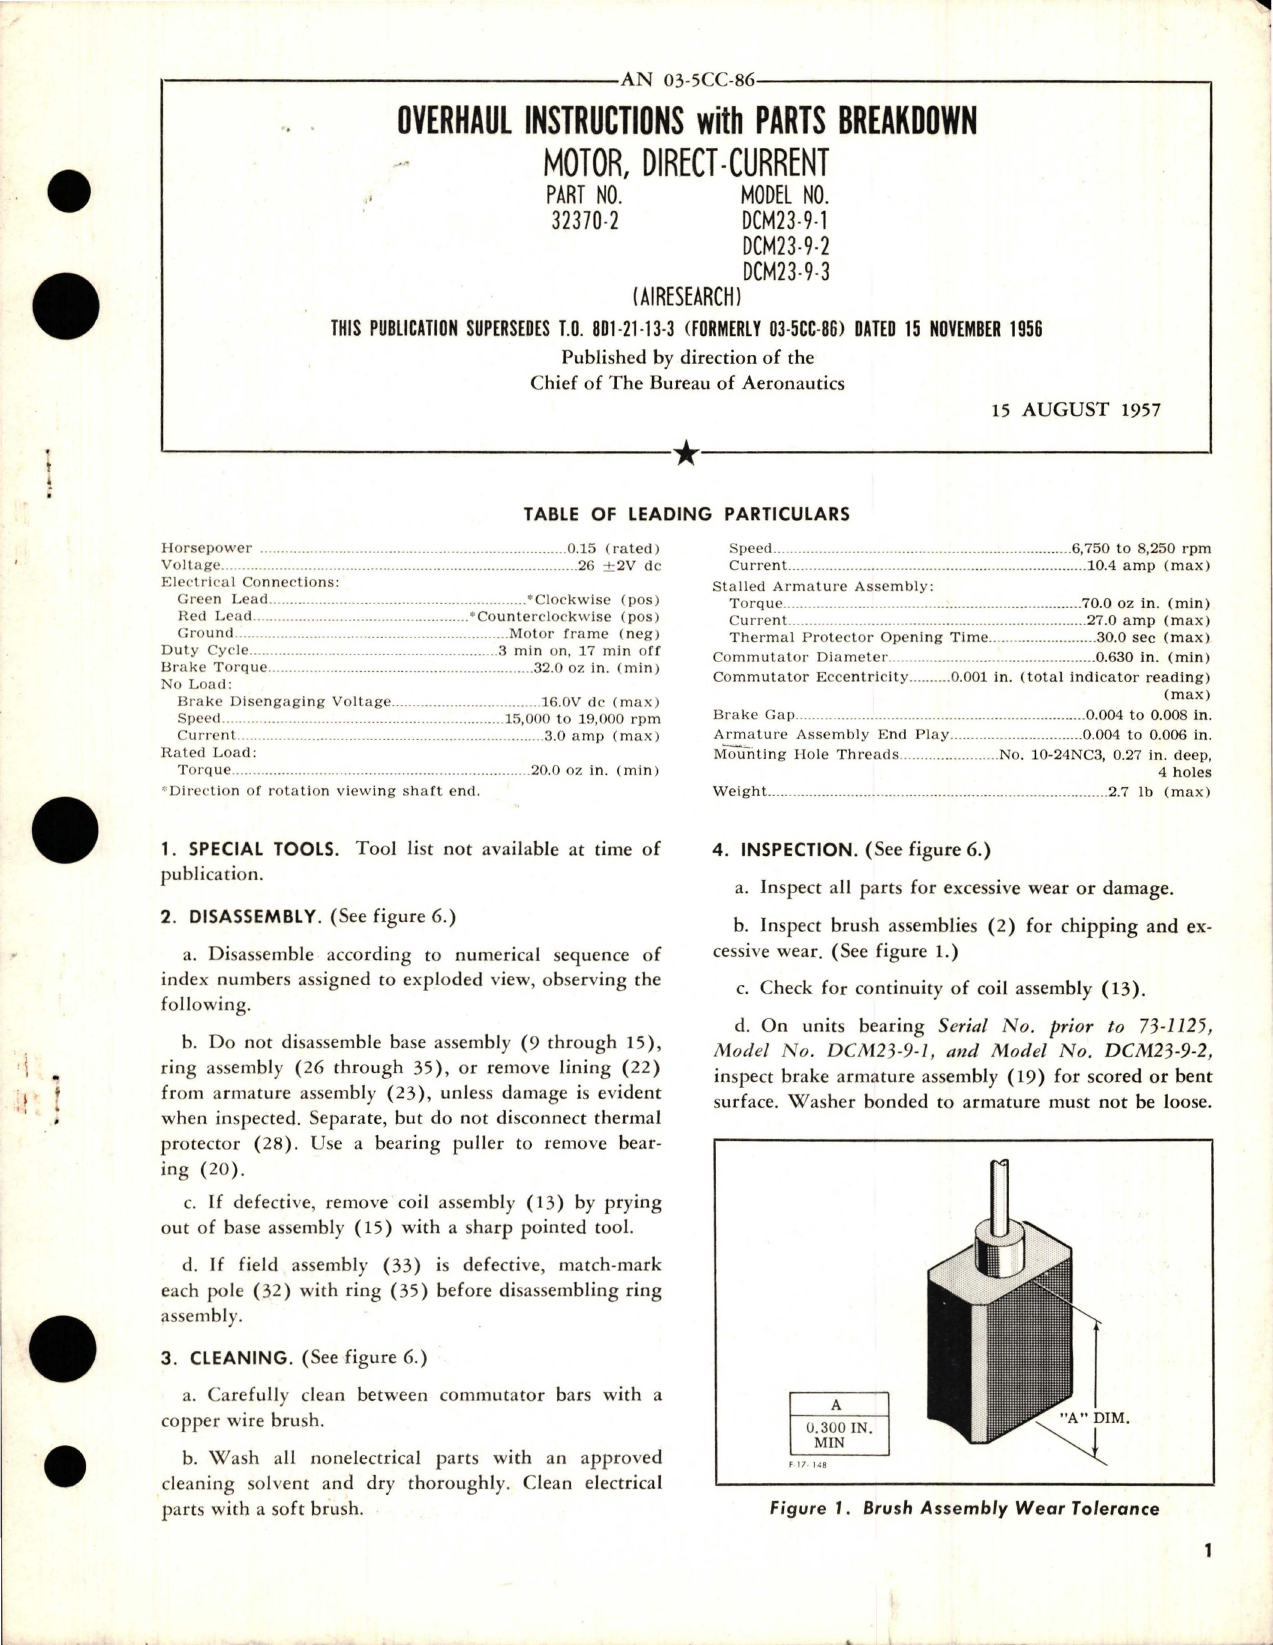 Sample page 1 from AirCorps Library document: Overhaul Instructions with Parts Breakdown for Direct Current Motor - Part 32370-2 